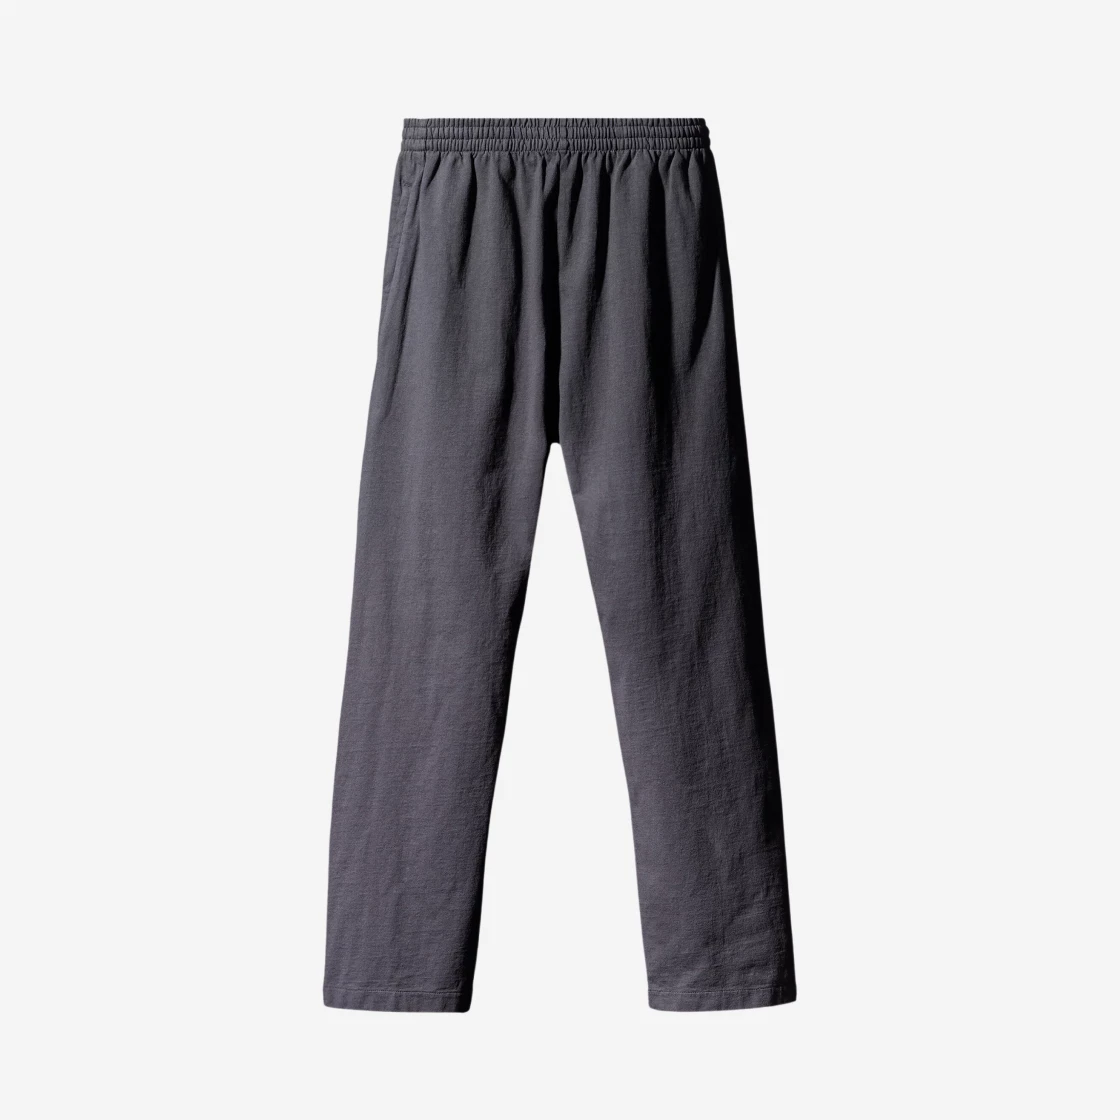 Balenciaga Yeezy Gap Engineered By Fitted Sweatpants in Black